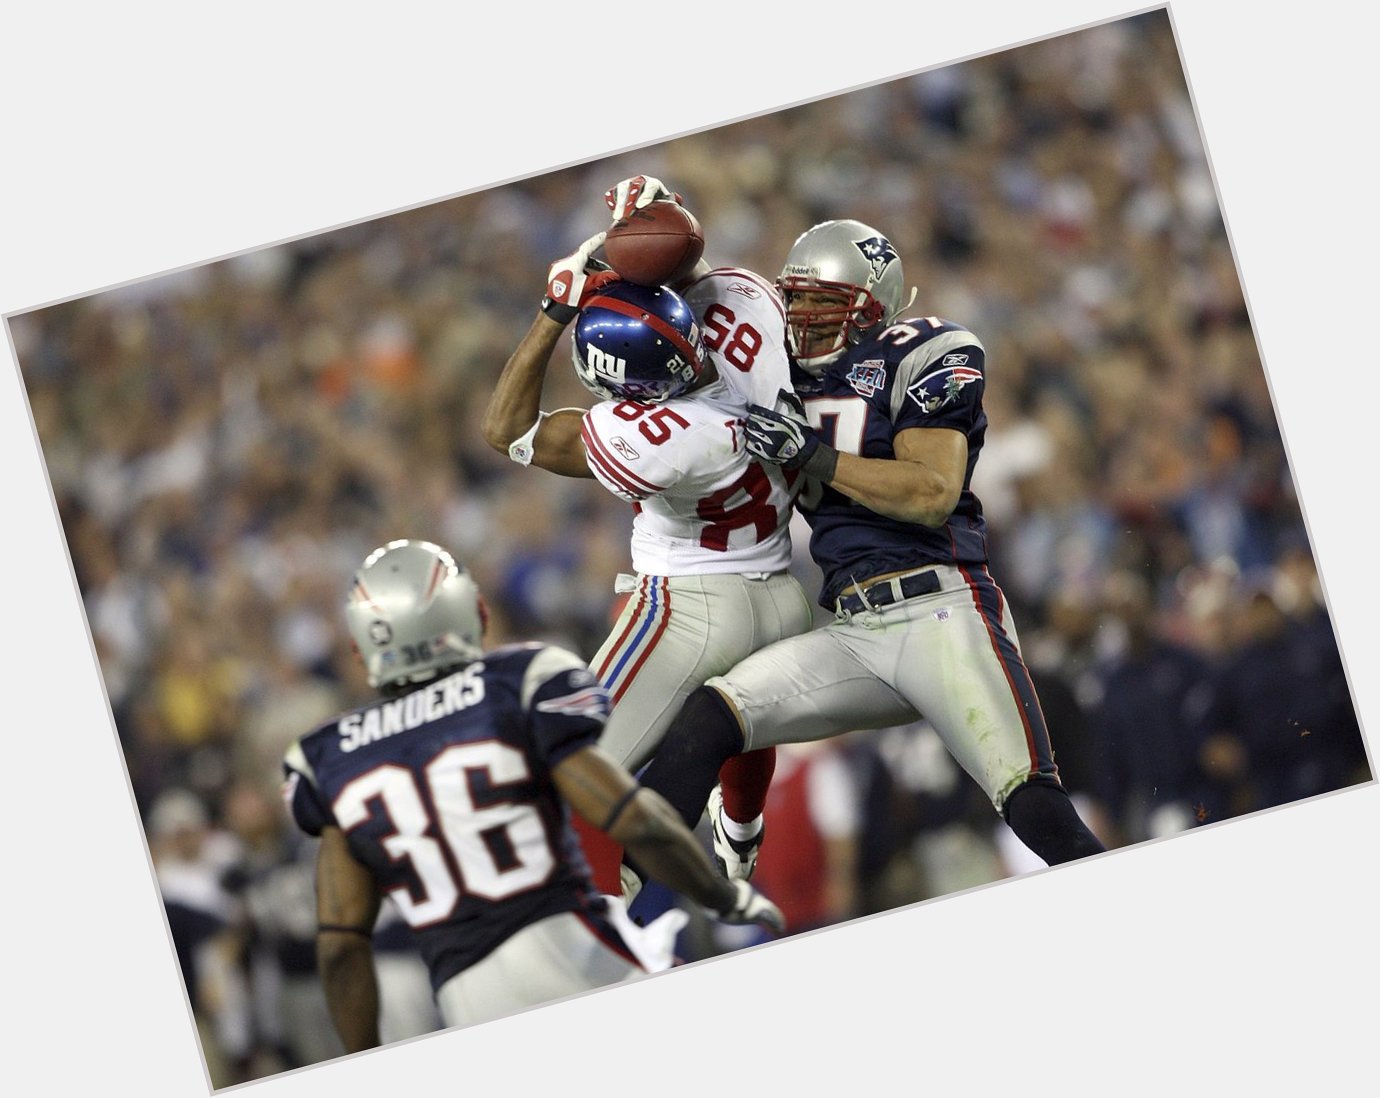 Another happy birthday to the man who made the greatest catch in super bowl history David tyree   